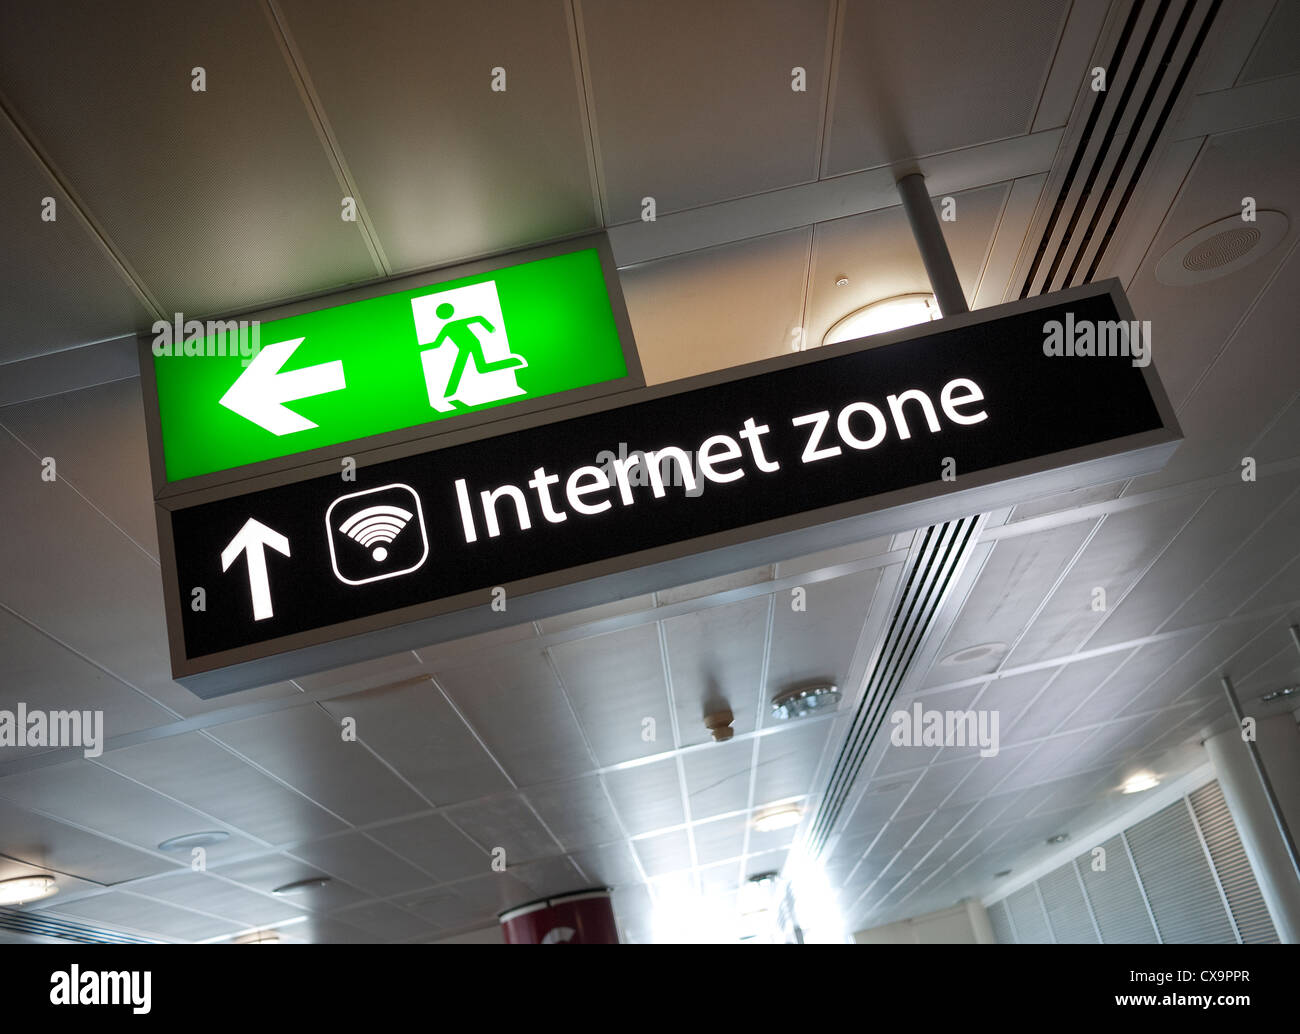 internet zone sign at gatwick airport terminal, england Stock Photo